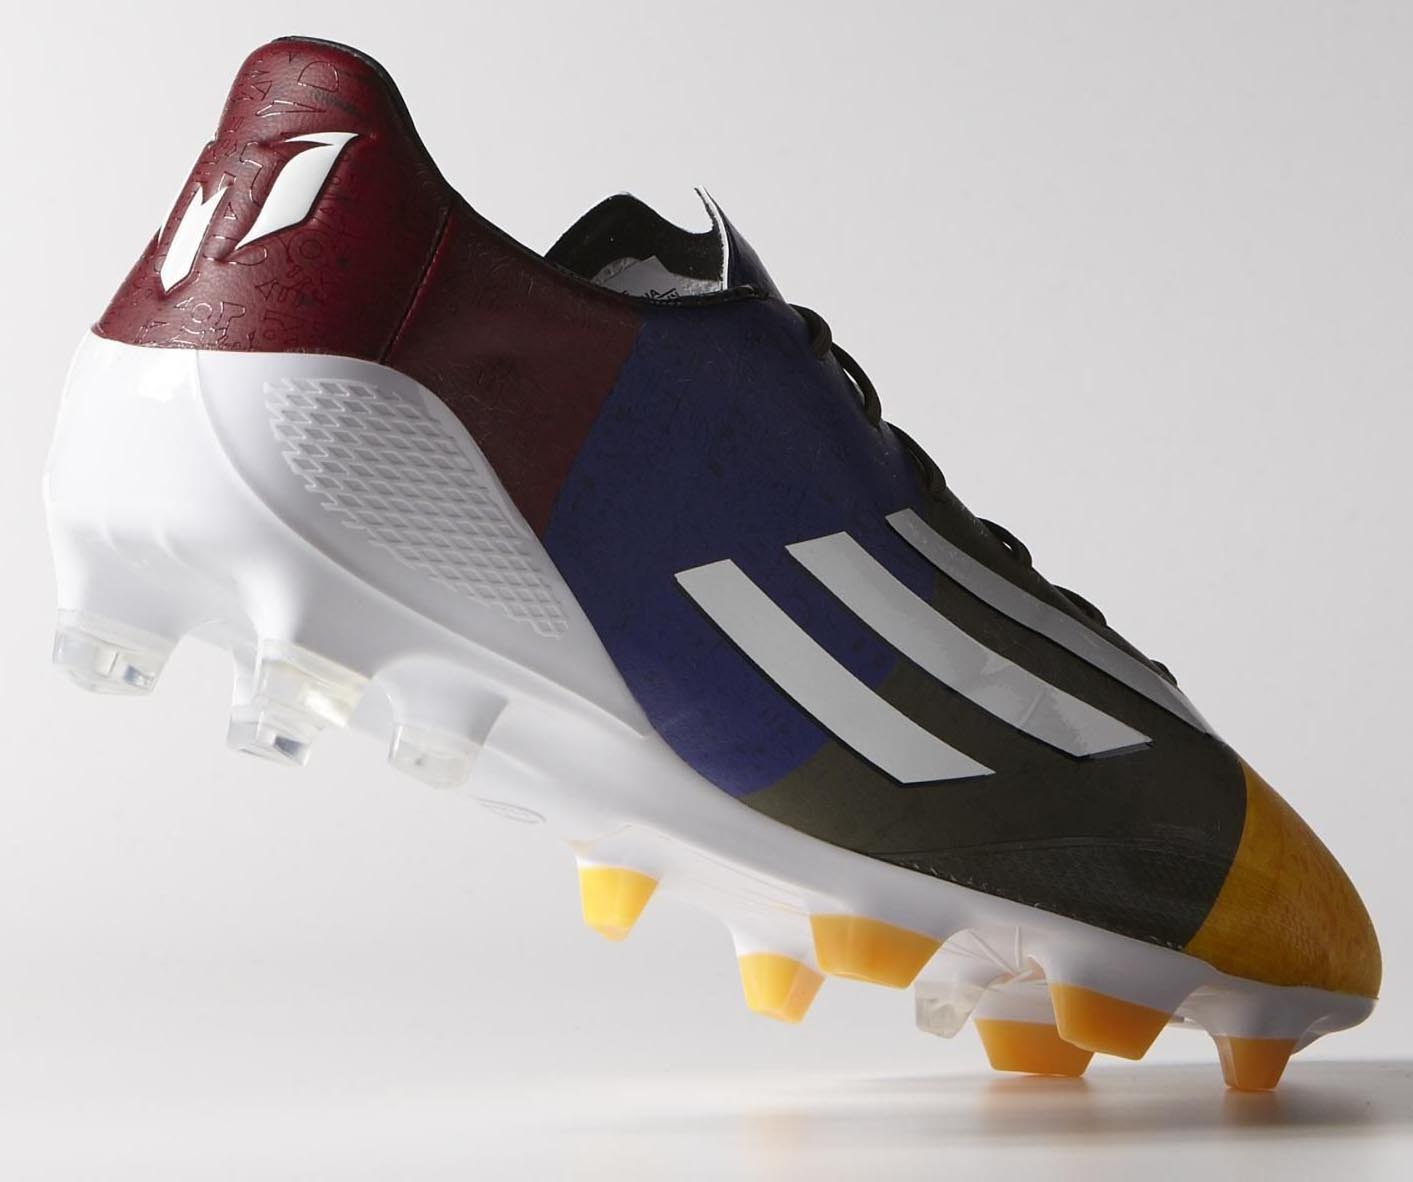 messi 2015 shoes